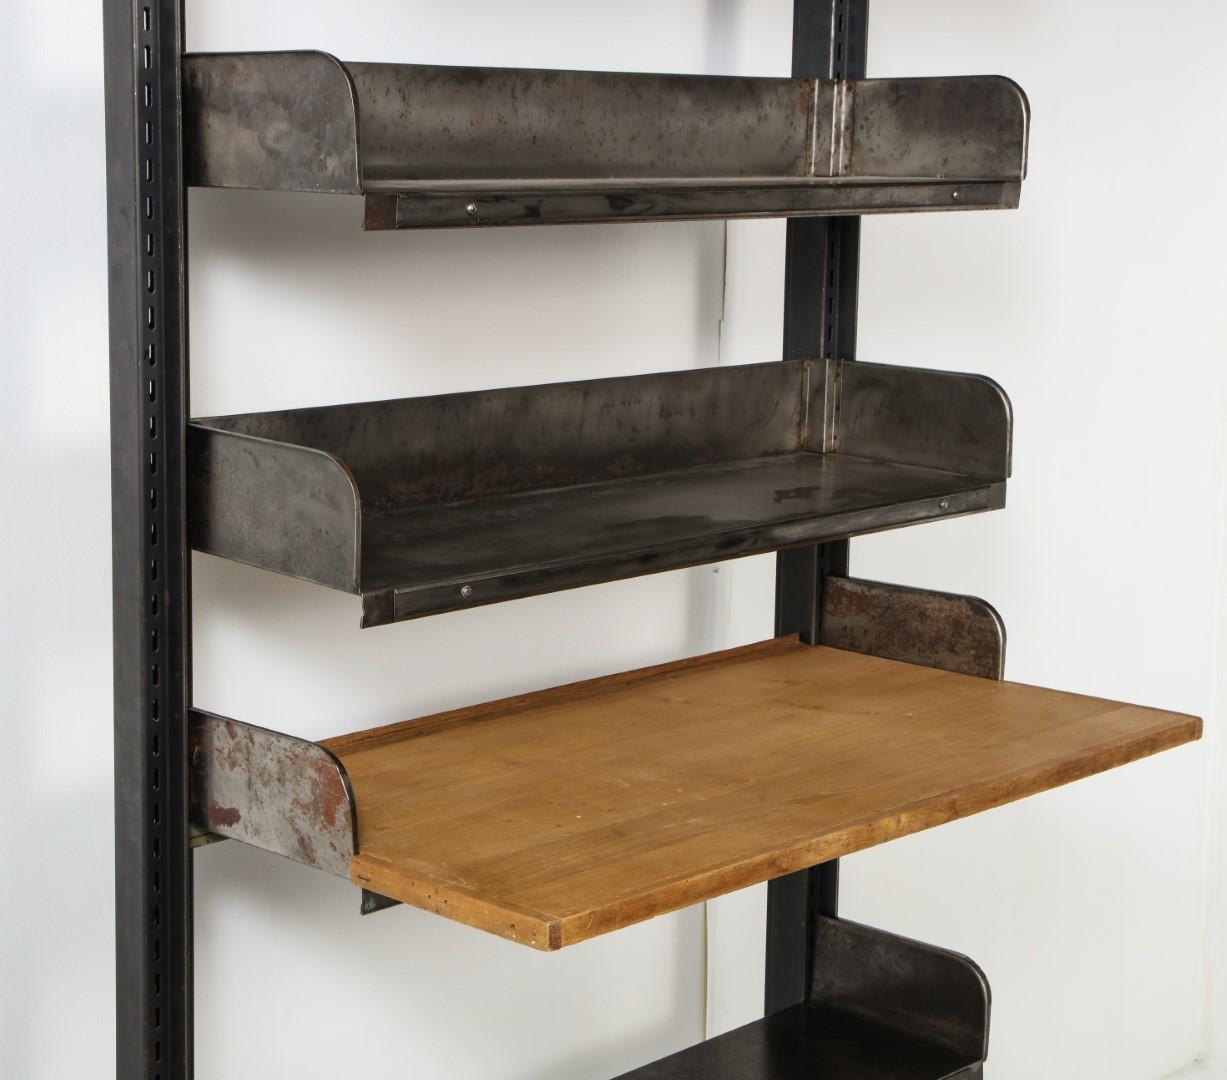 Midcentury French Industrial Iron Shelving System with Wood Desktop For Sale 4